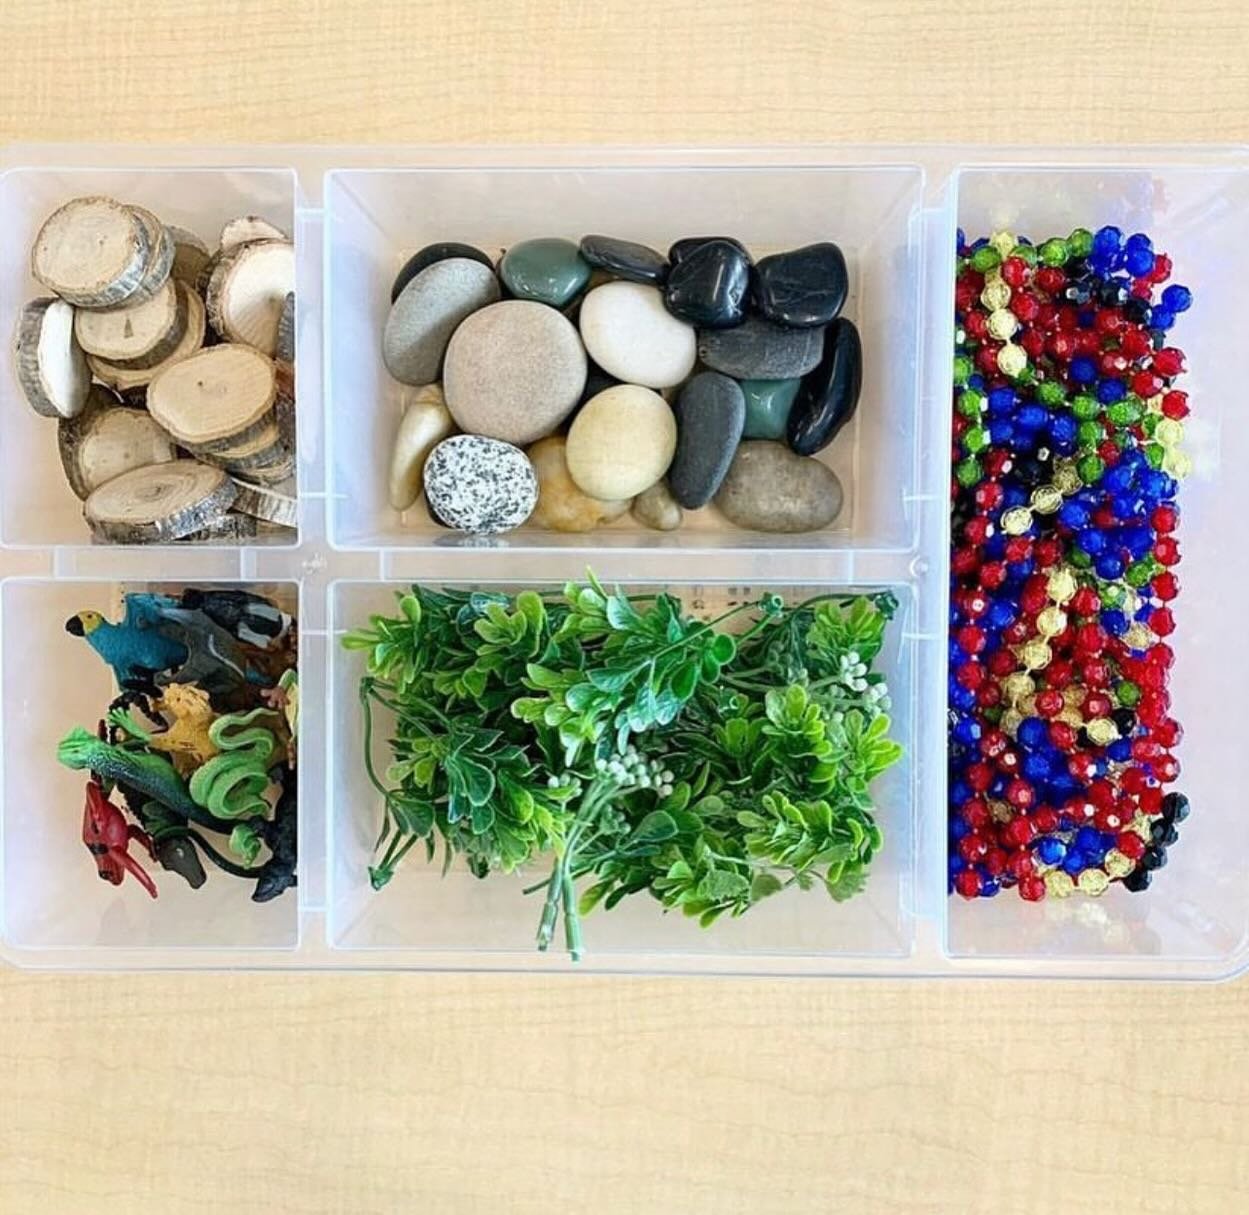 Rainforest friends loose parts 

The kids are loving this rainforest inspired loose parts tray. 🦎🦋🐍

Where to find:
Animals - Michaels 
Greenery - any dollar or craft store
Rocks - &hellip;duh
Wood slices - Dollar Tree 
Beads - cut up from thrifte